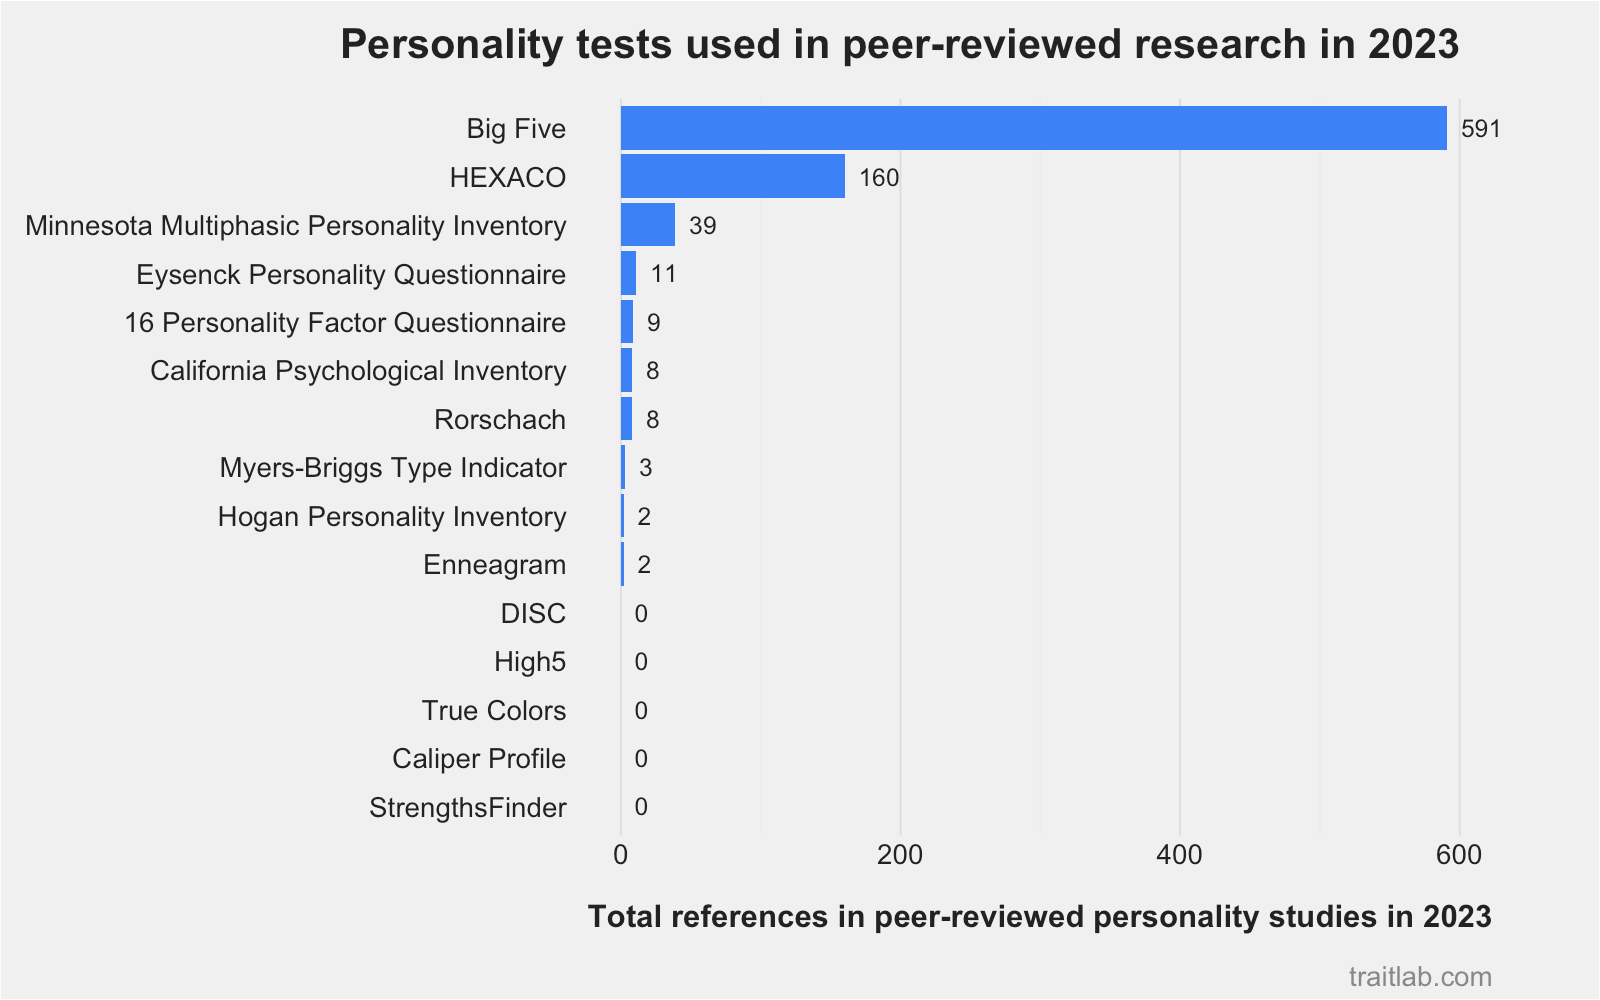 15 personality tests ranked by references in scientific publications in 2023